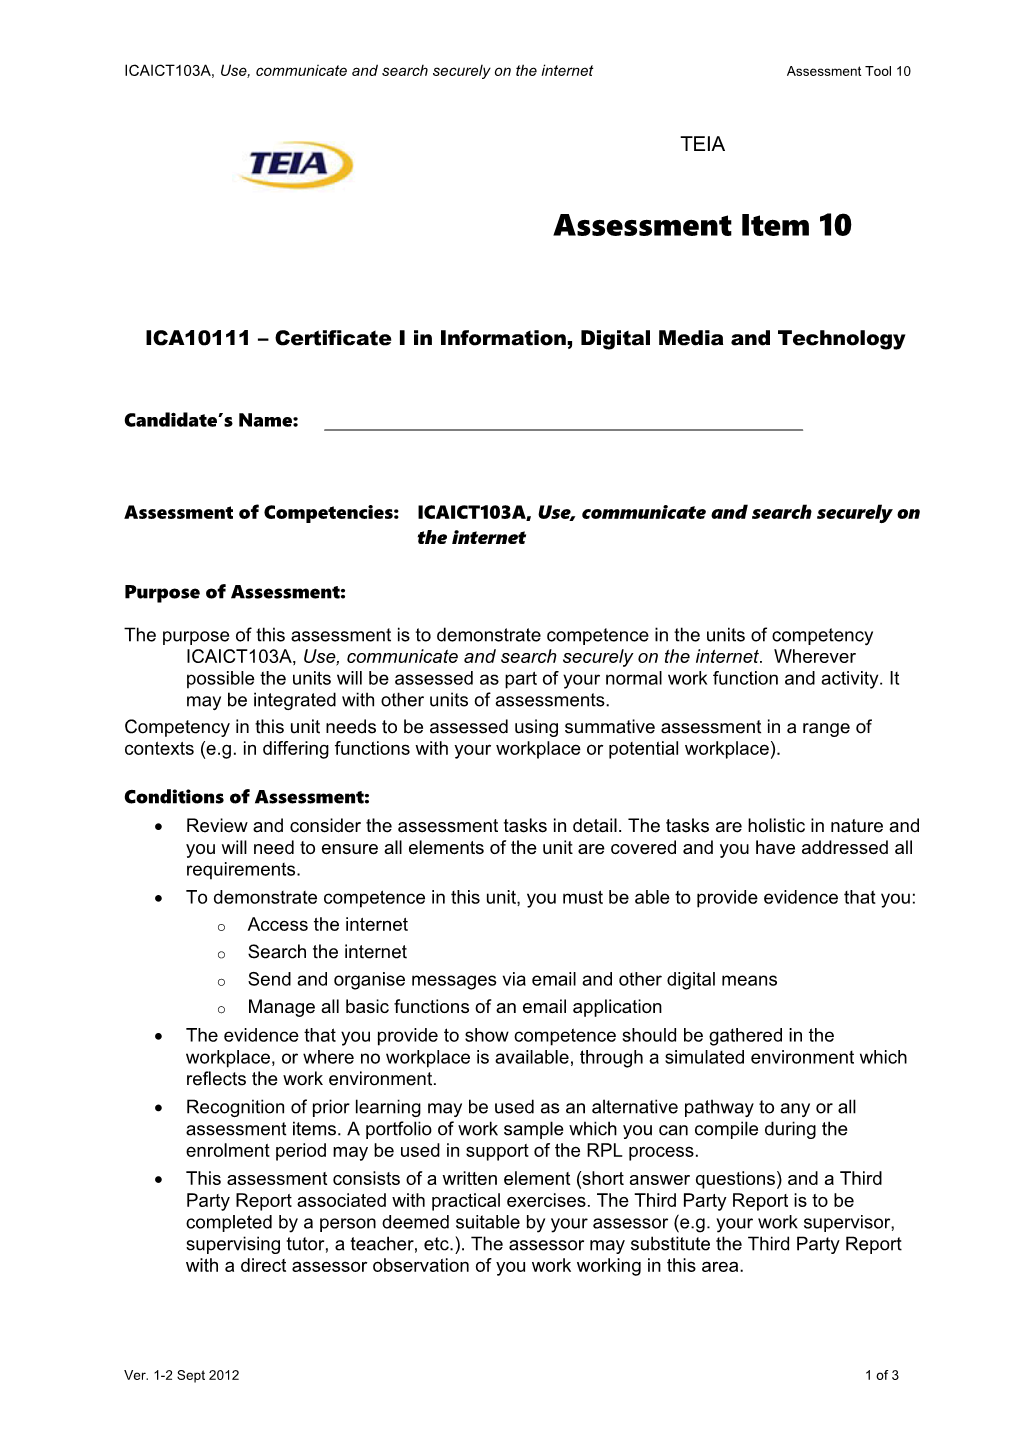 ICAICT103A, Use, Communicate and Search Securely on the Internet Assessment Tool 10